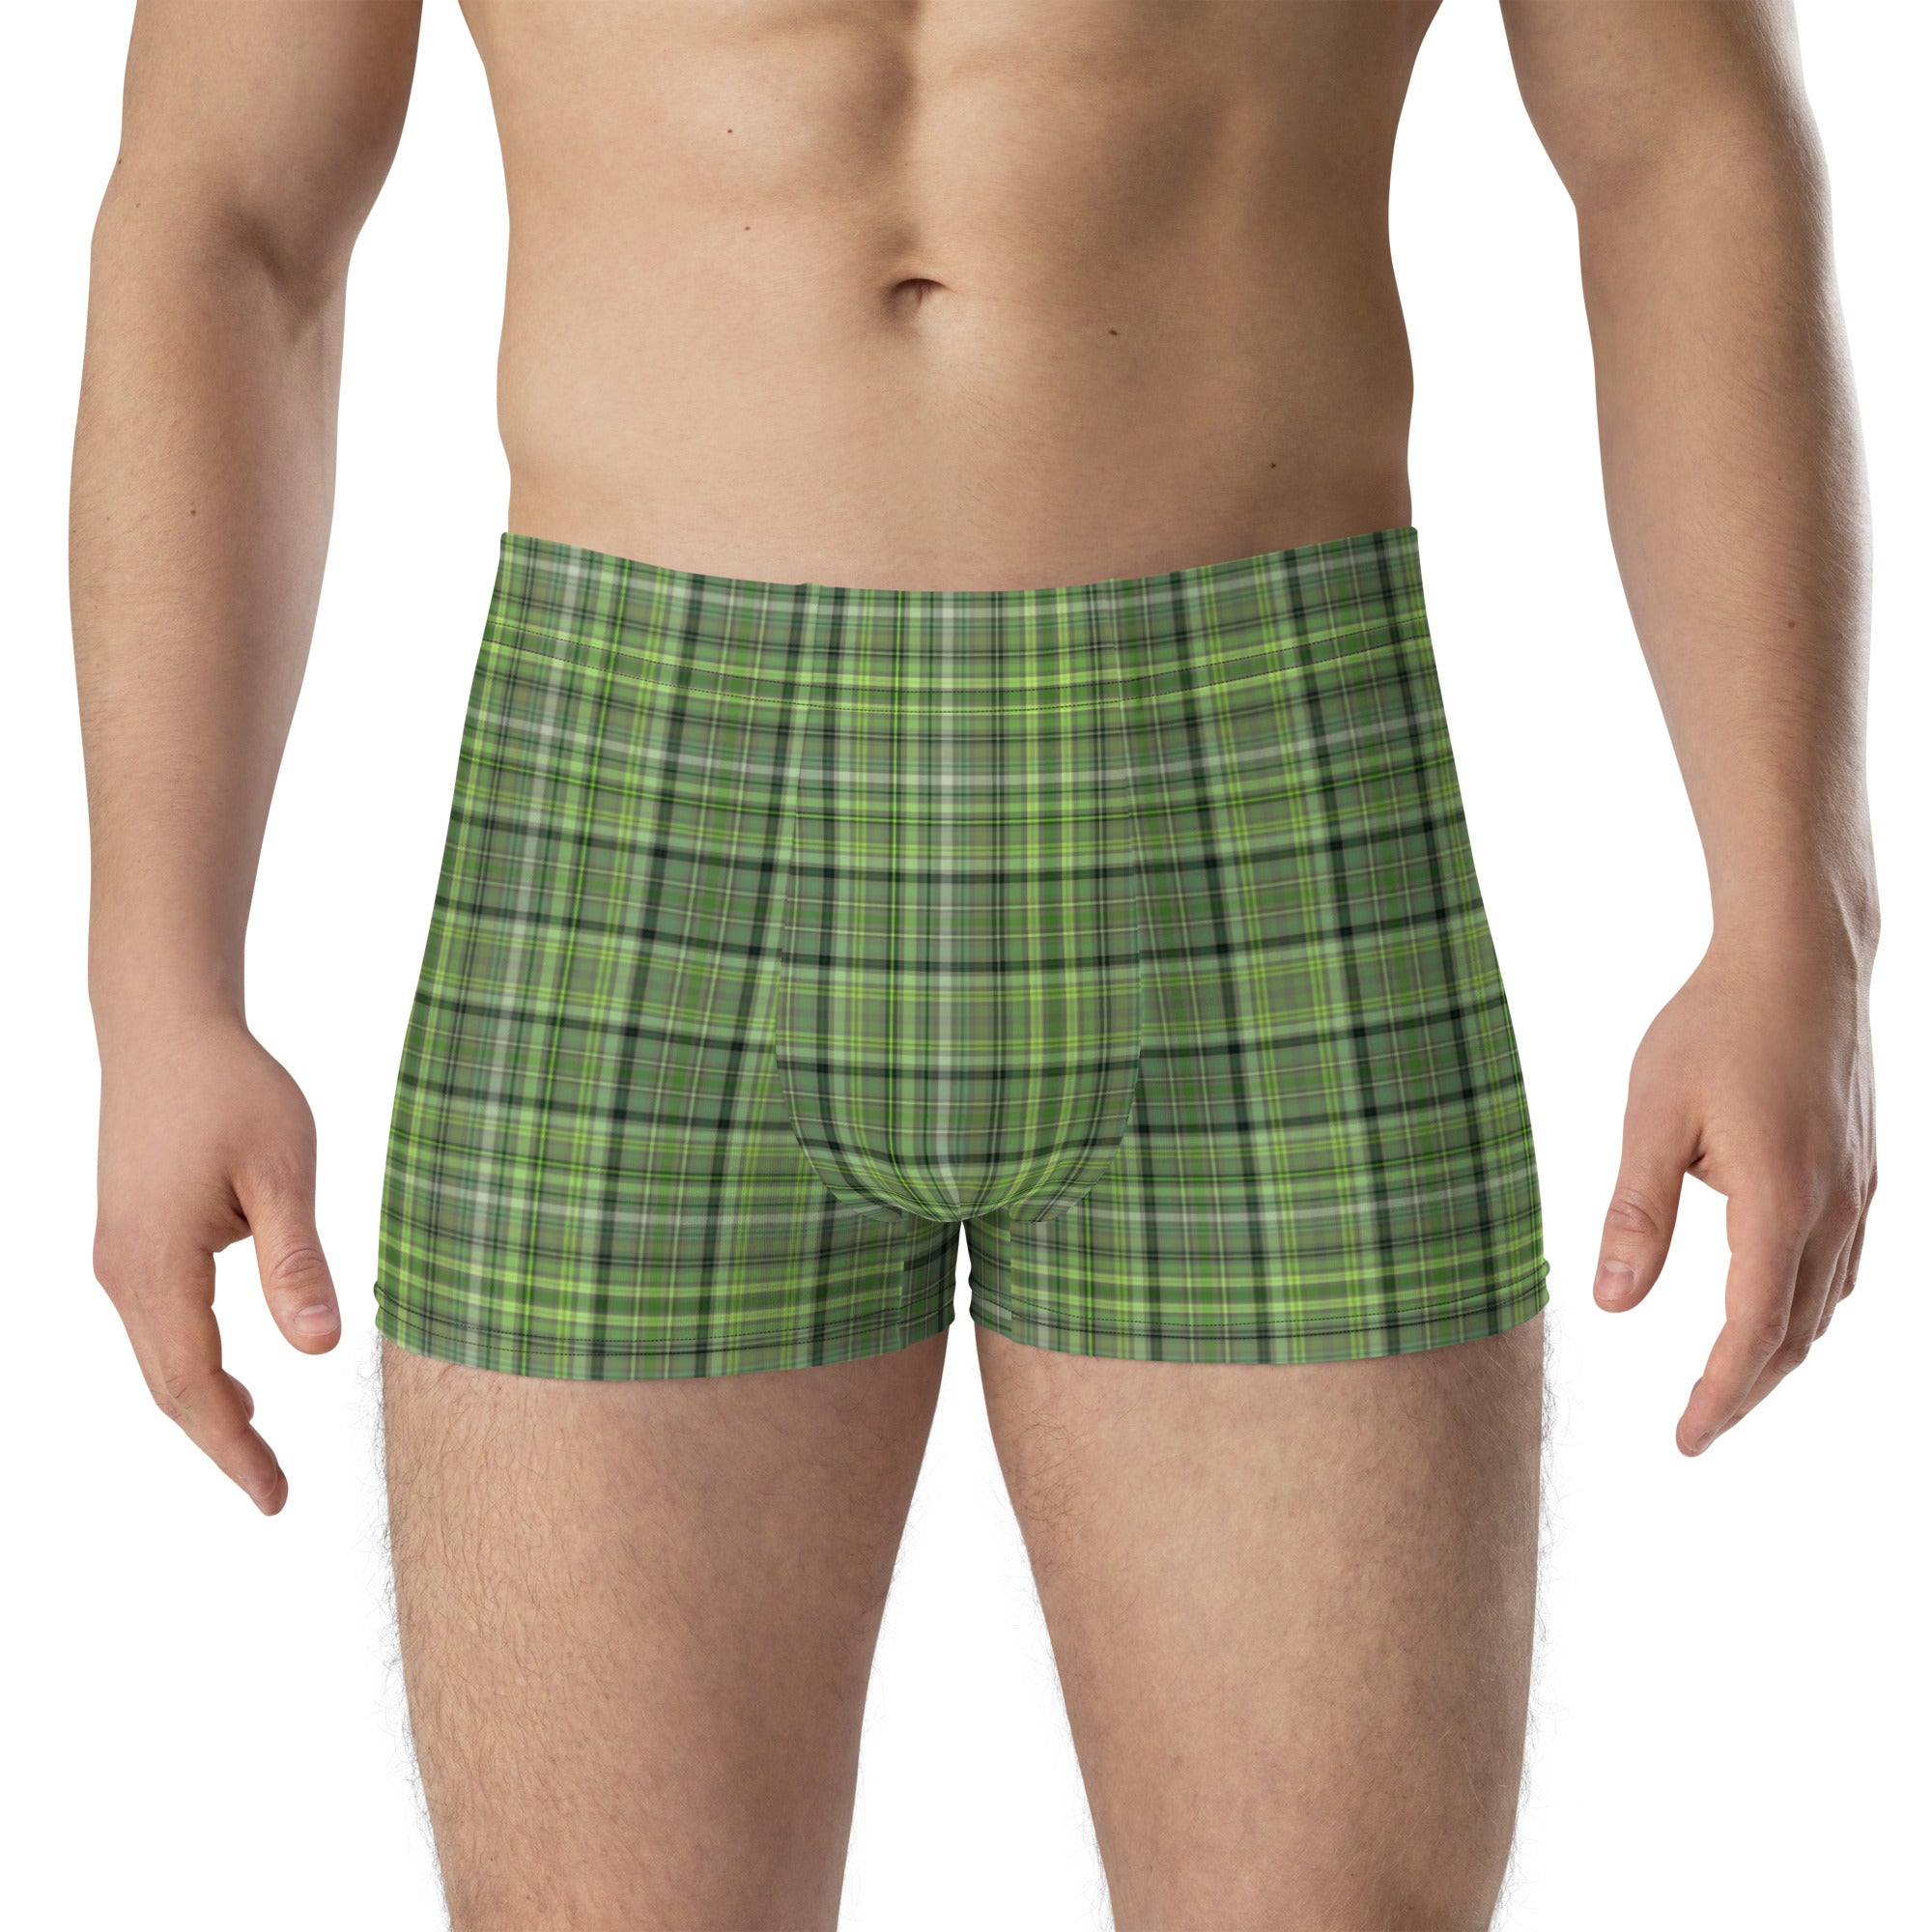 Stylish and breathable men's checkered underwear